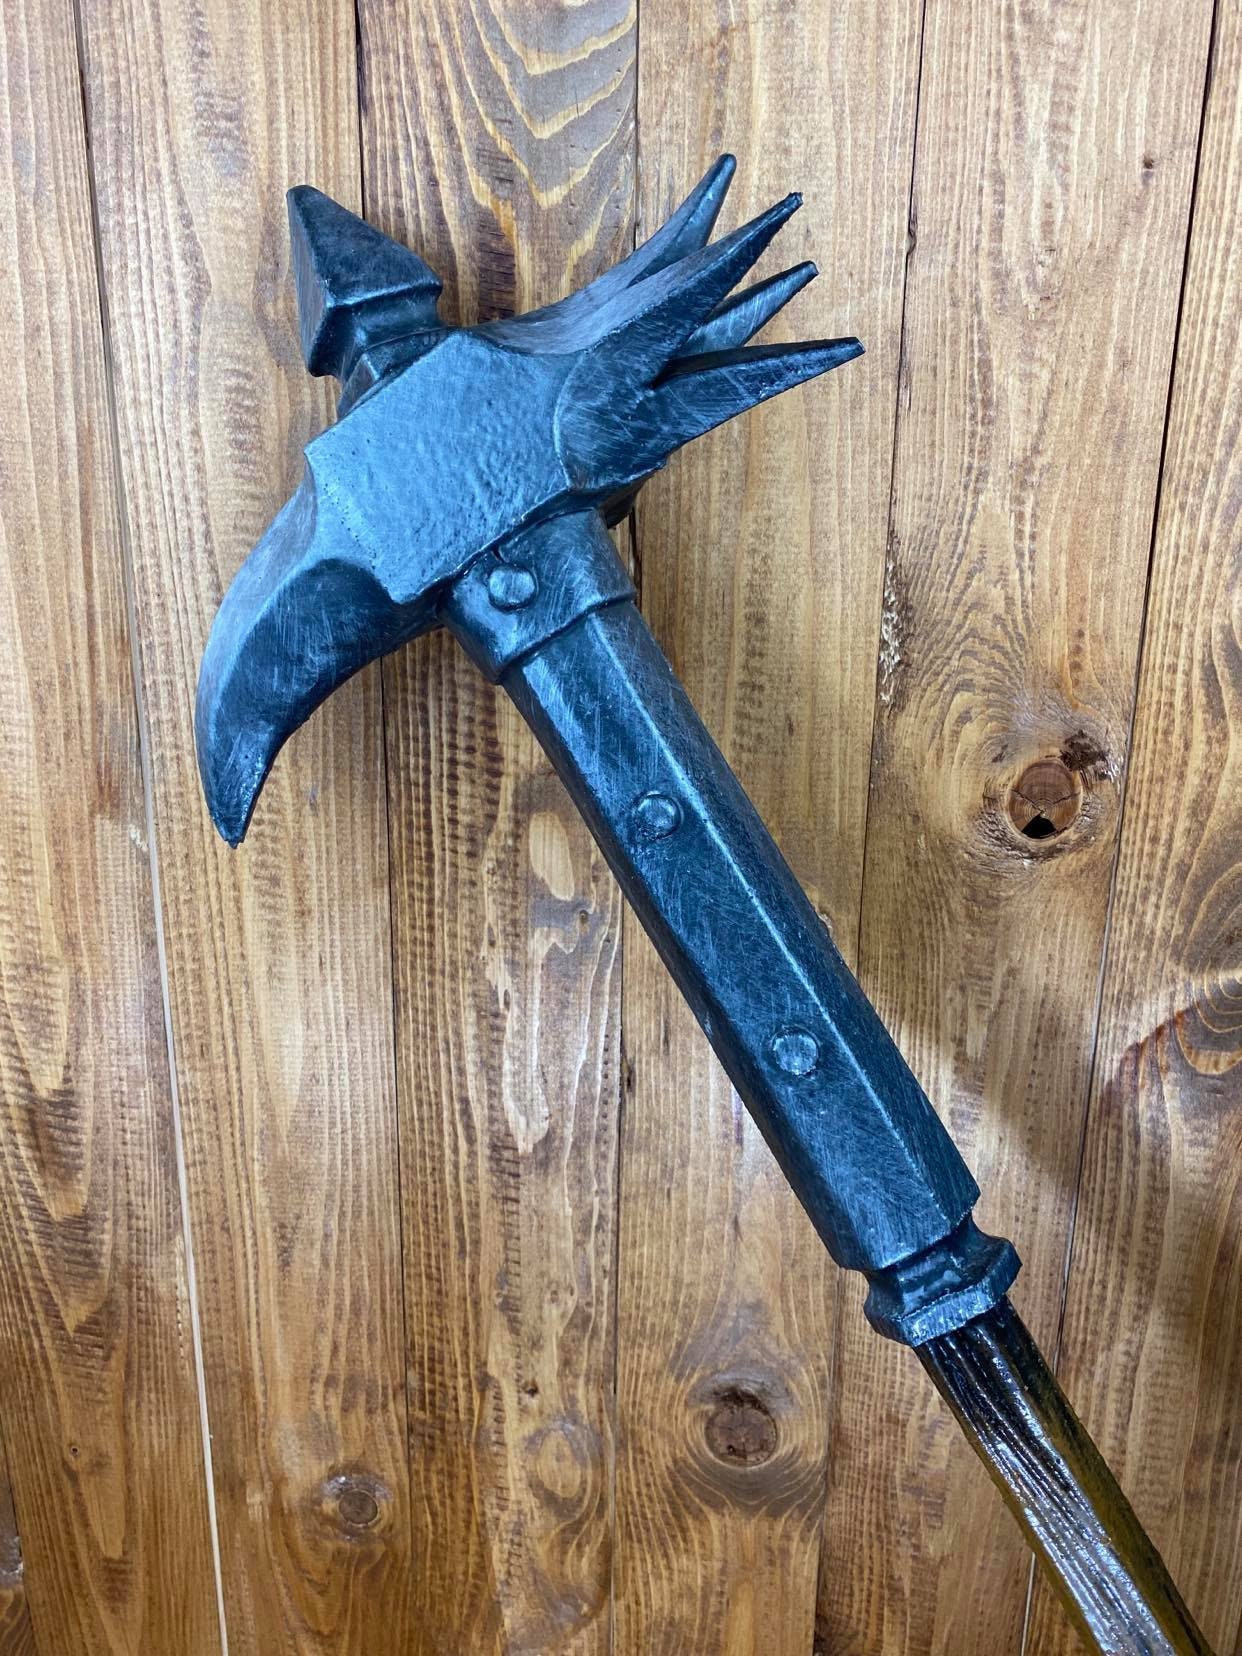 Teathre Cinema Latex Hammer Runic mace” Totally Handcrafted Cosplay Perfect for Larp